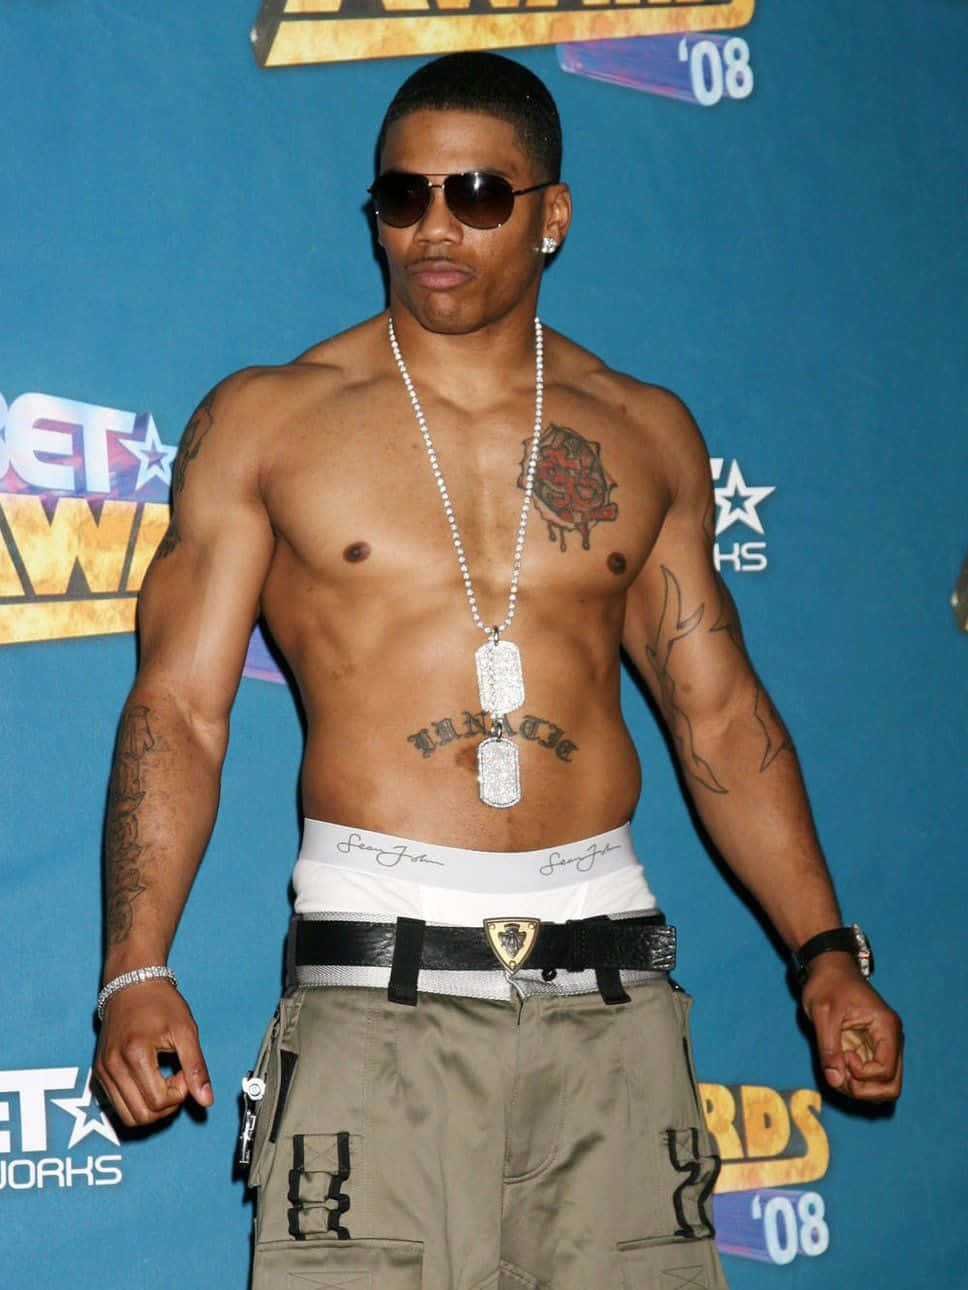 Nelly Shirtless During 2008 BET Awards Wallpaper